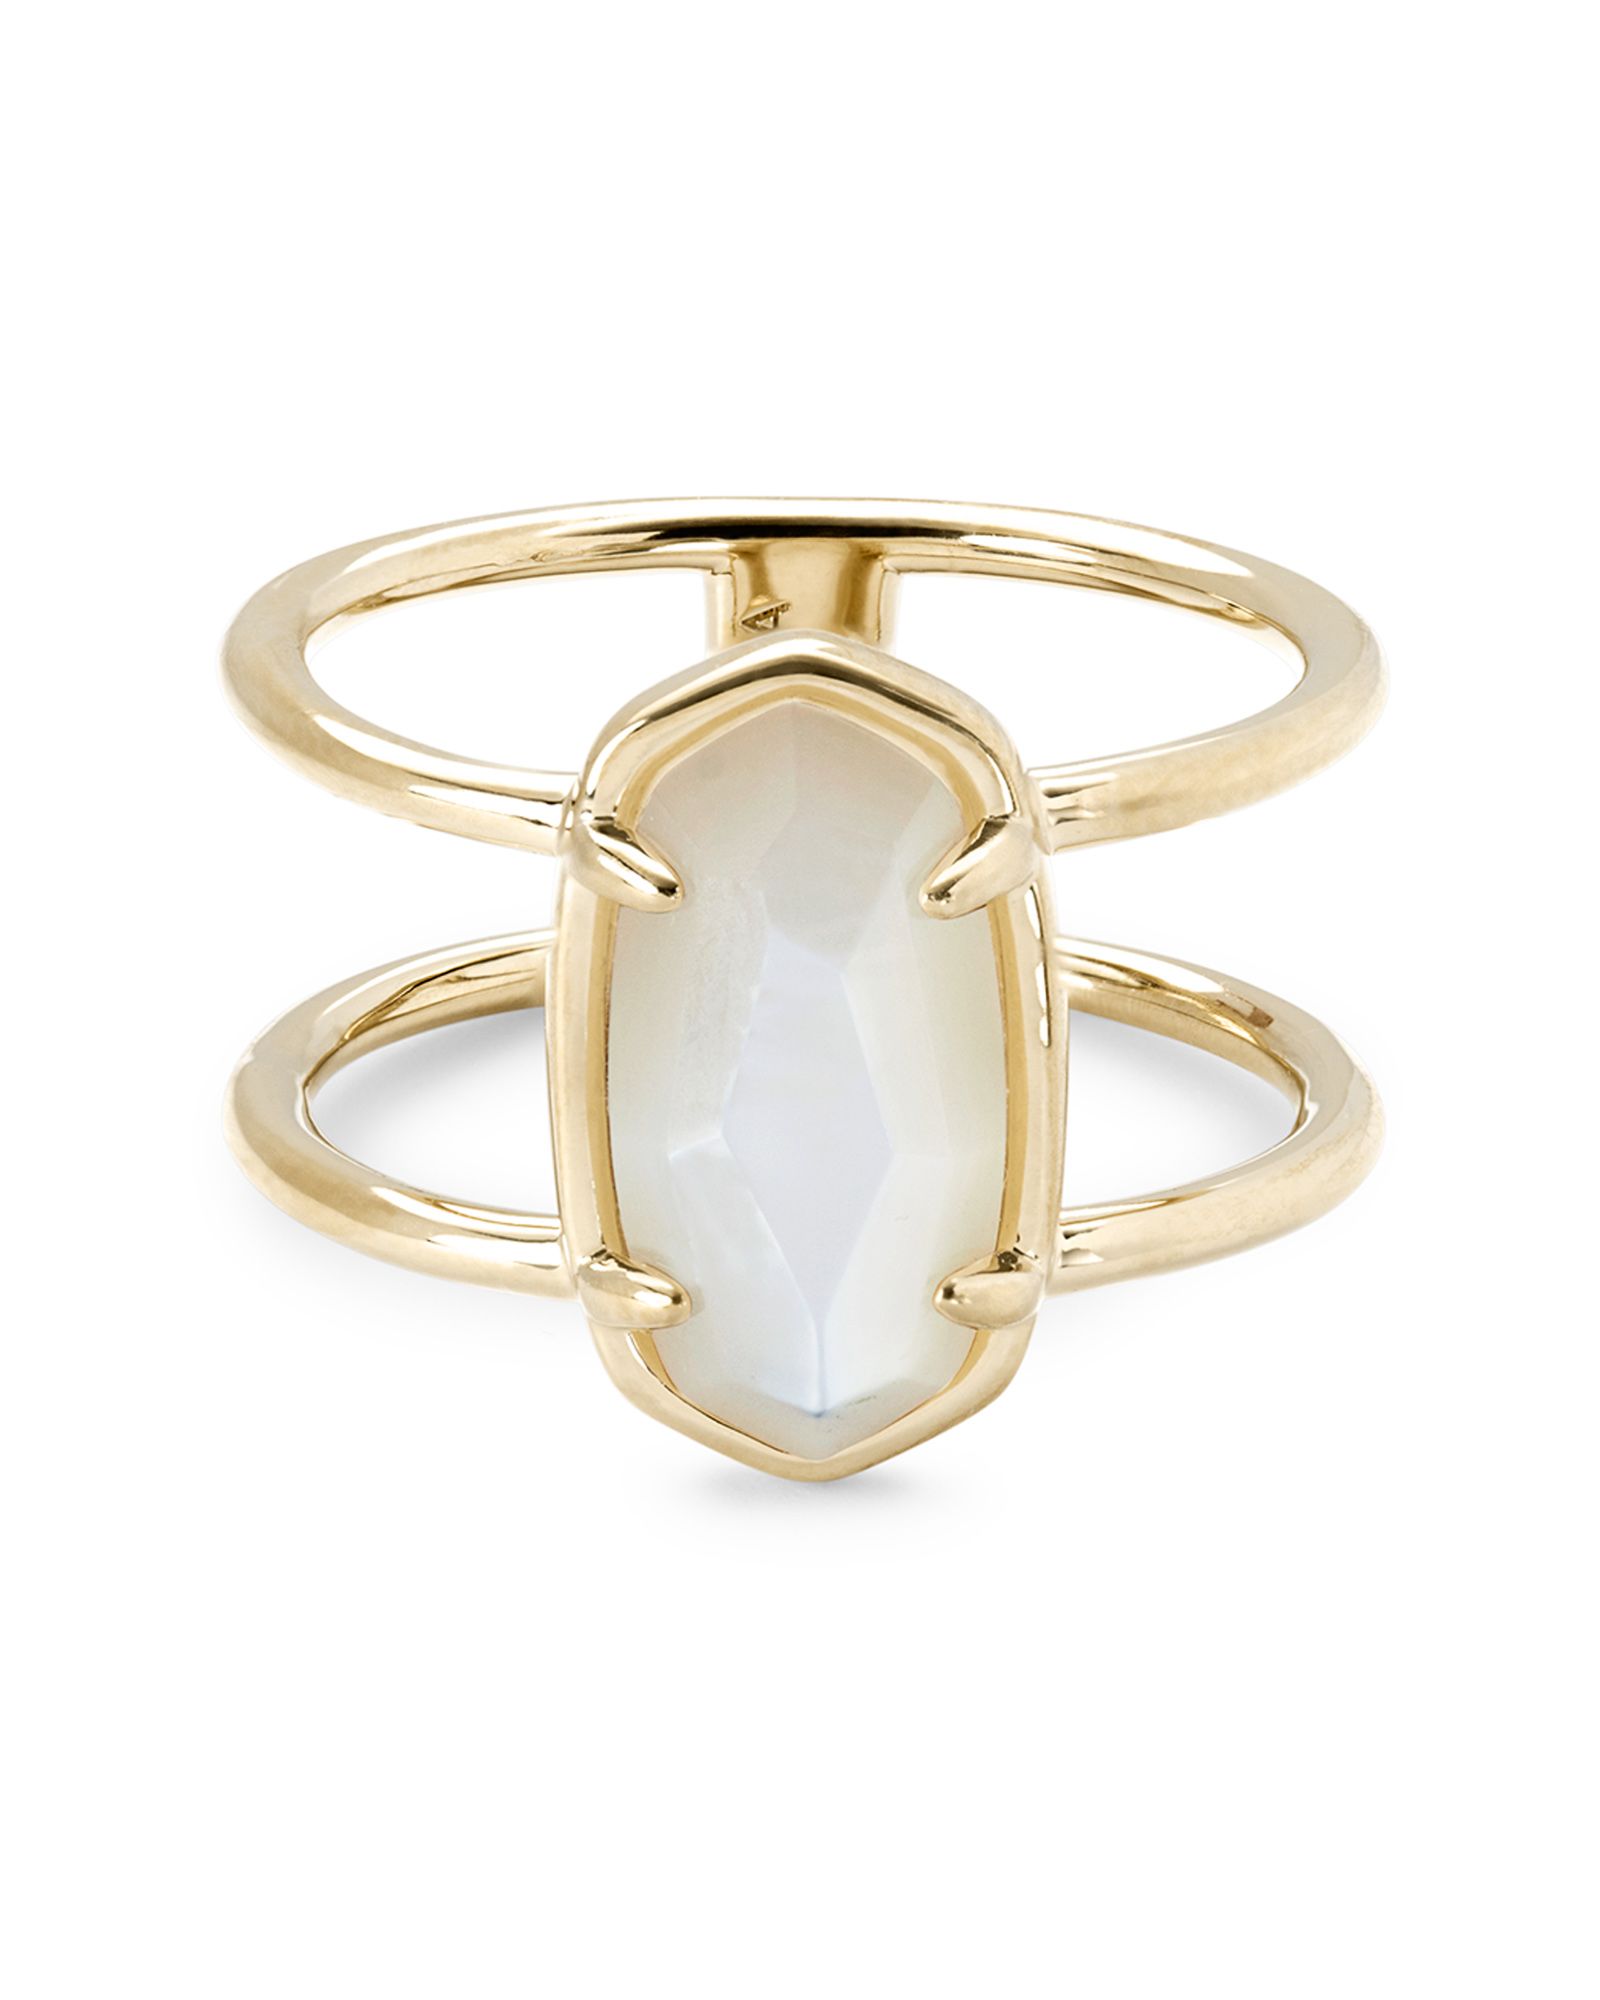 Elyse 18k Gold Vermeil Double Band Ring in Ivory Mother Of Pearl | Kendra Scott | Kendra Scott